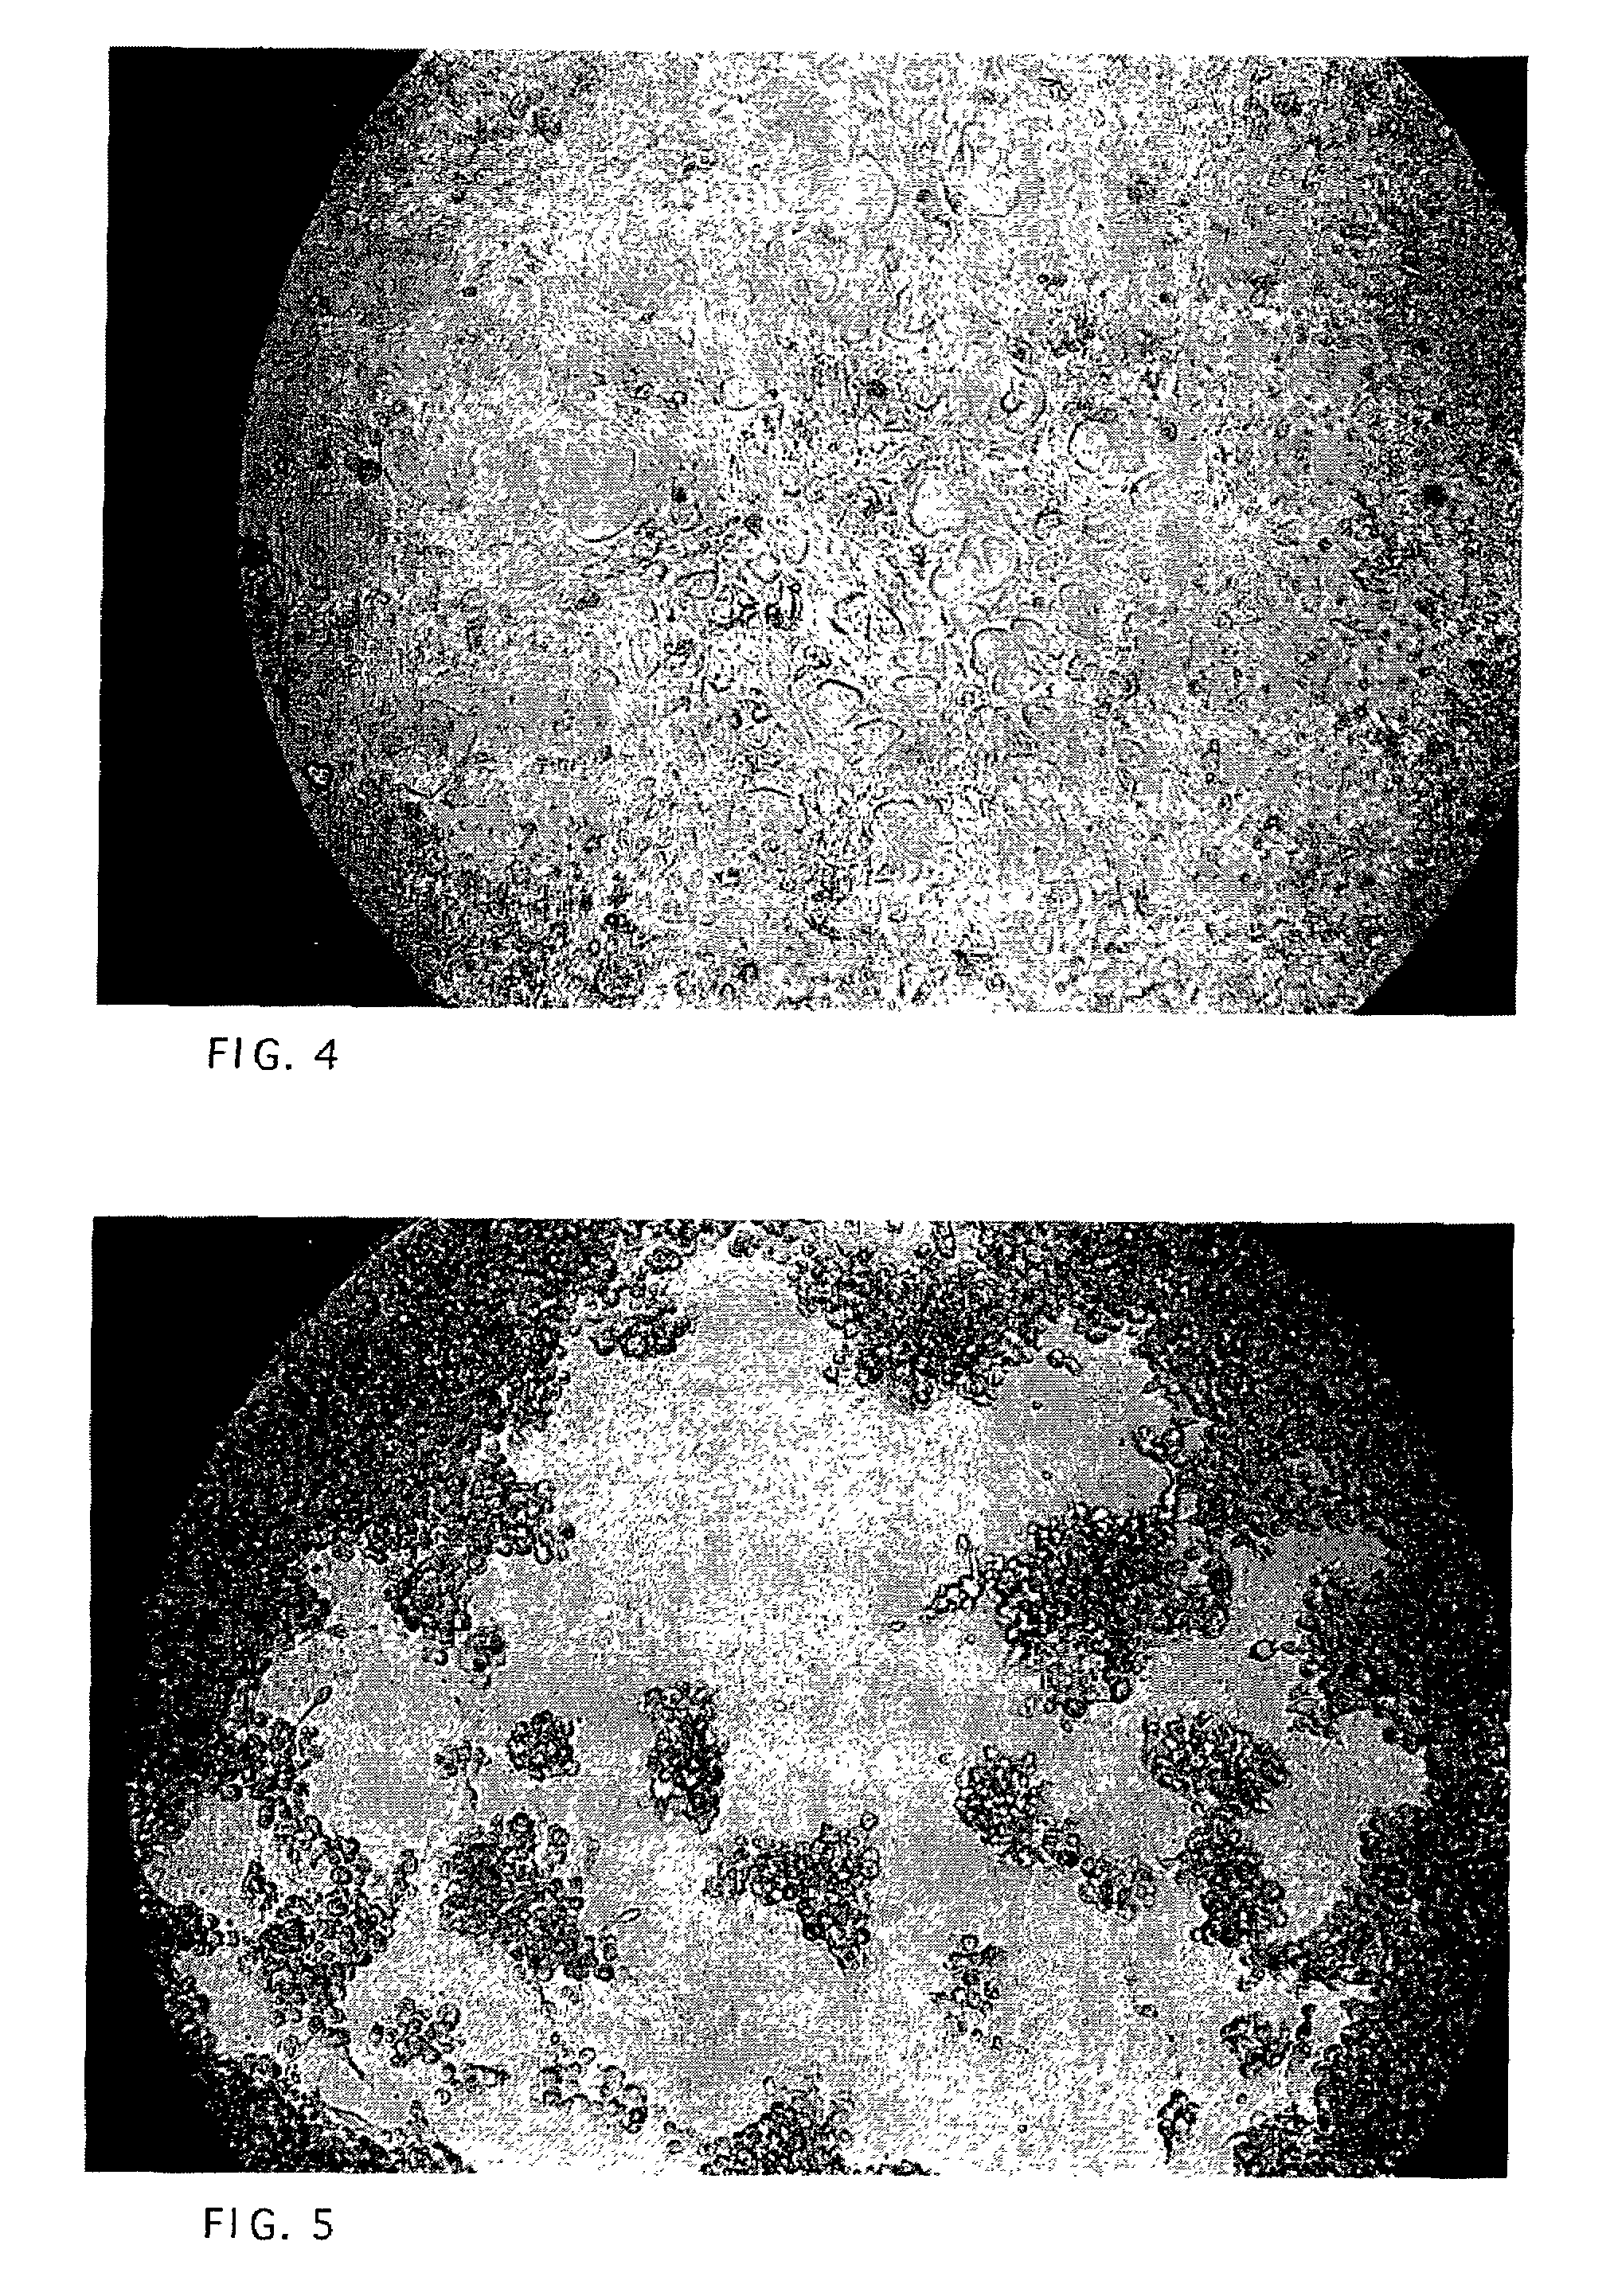 Alpha 2HS glycoprotein for treatment of cancer and a method for preparation thereof